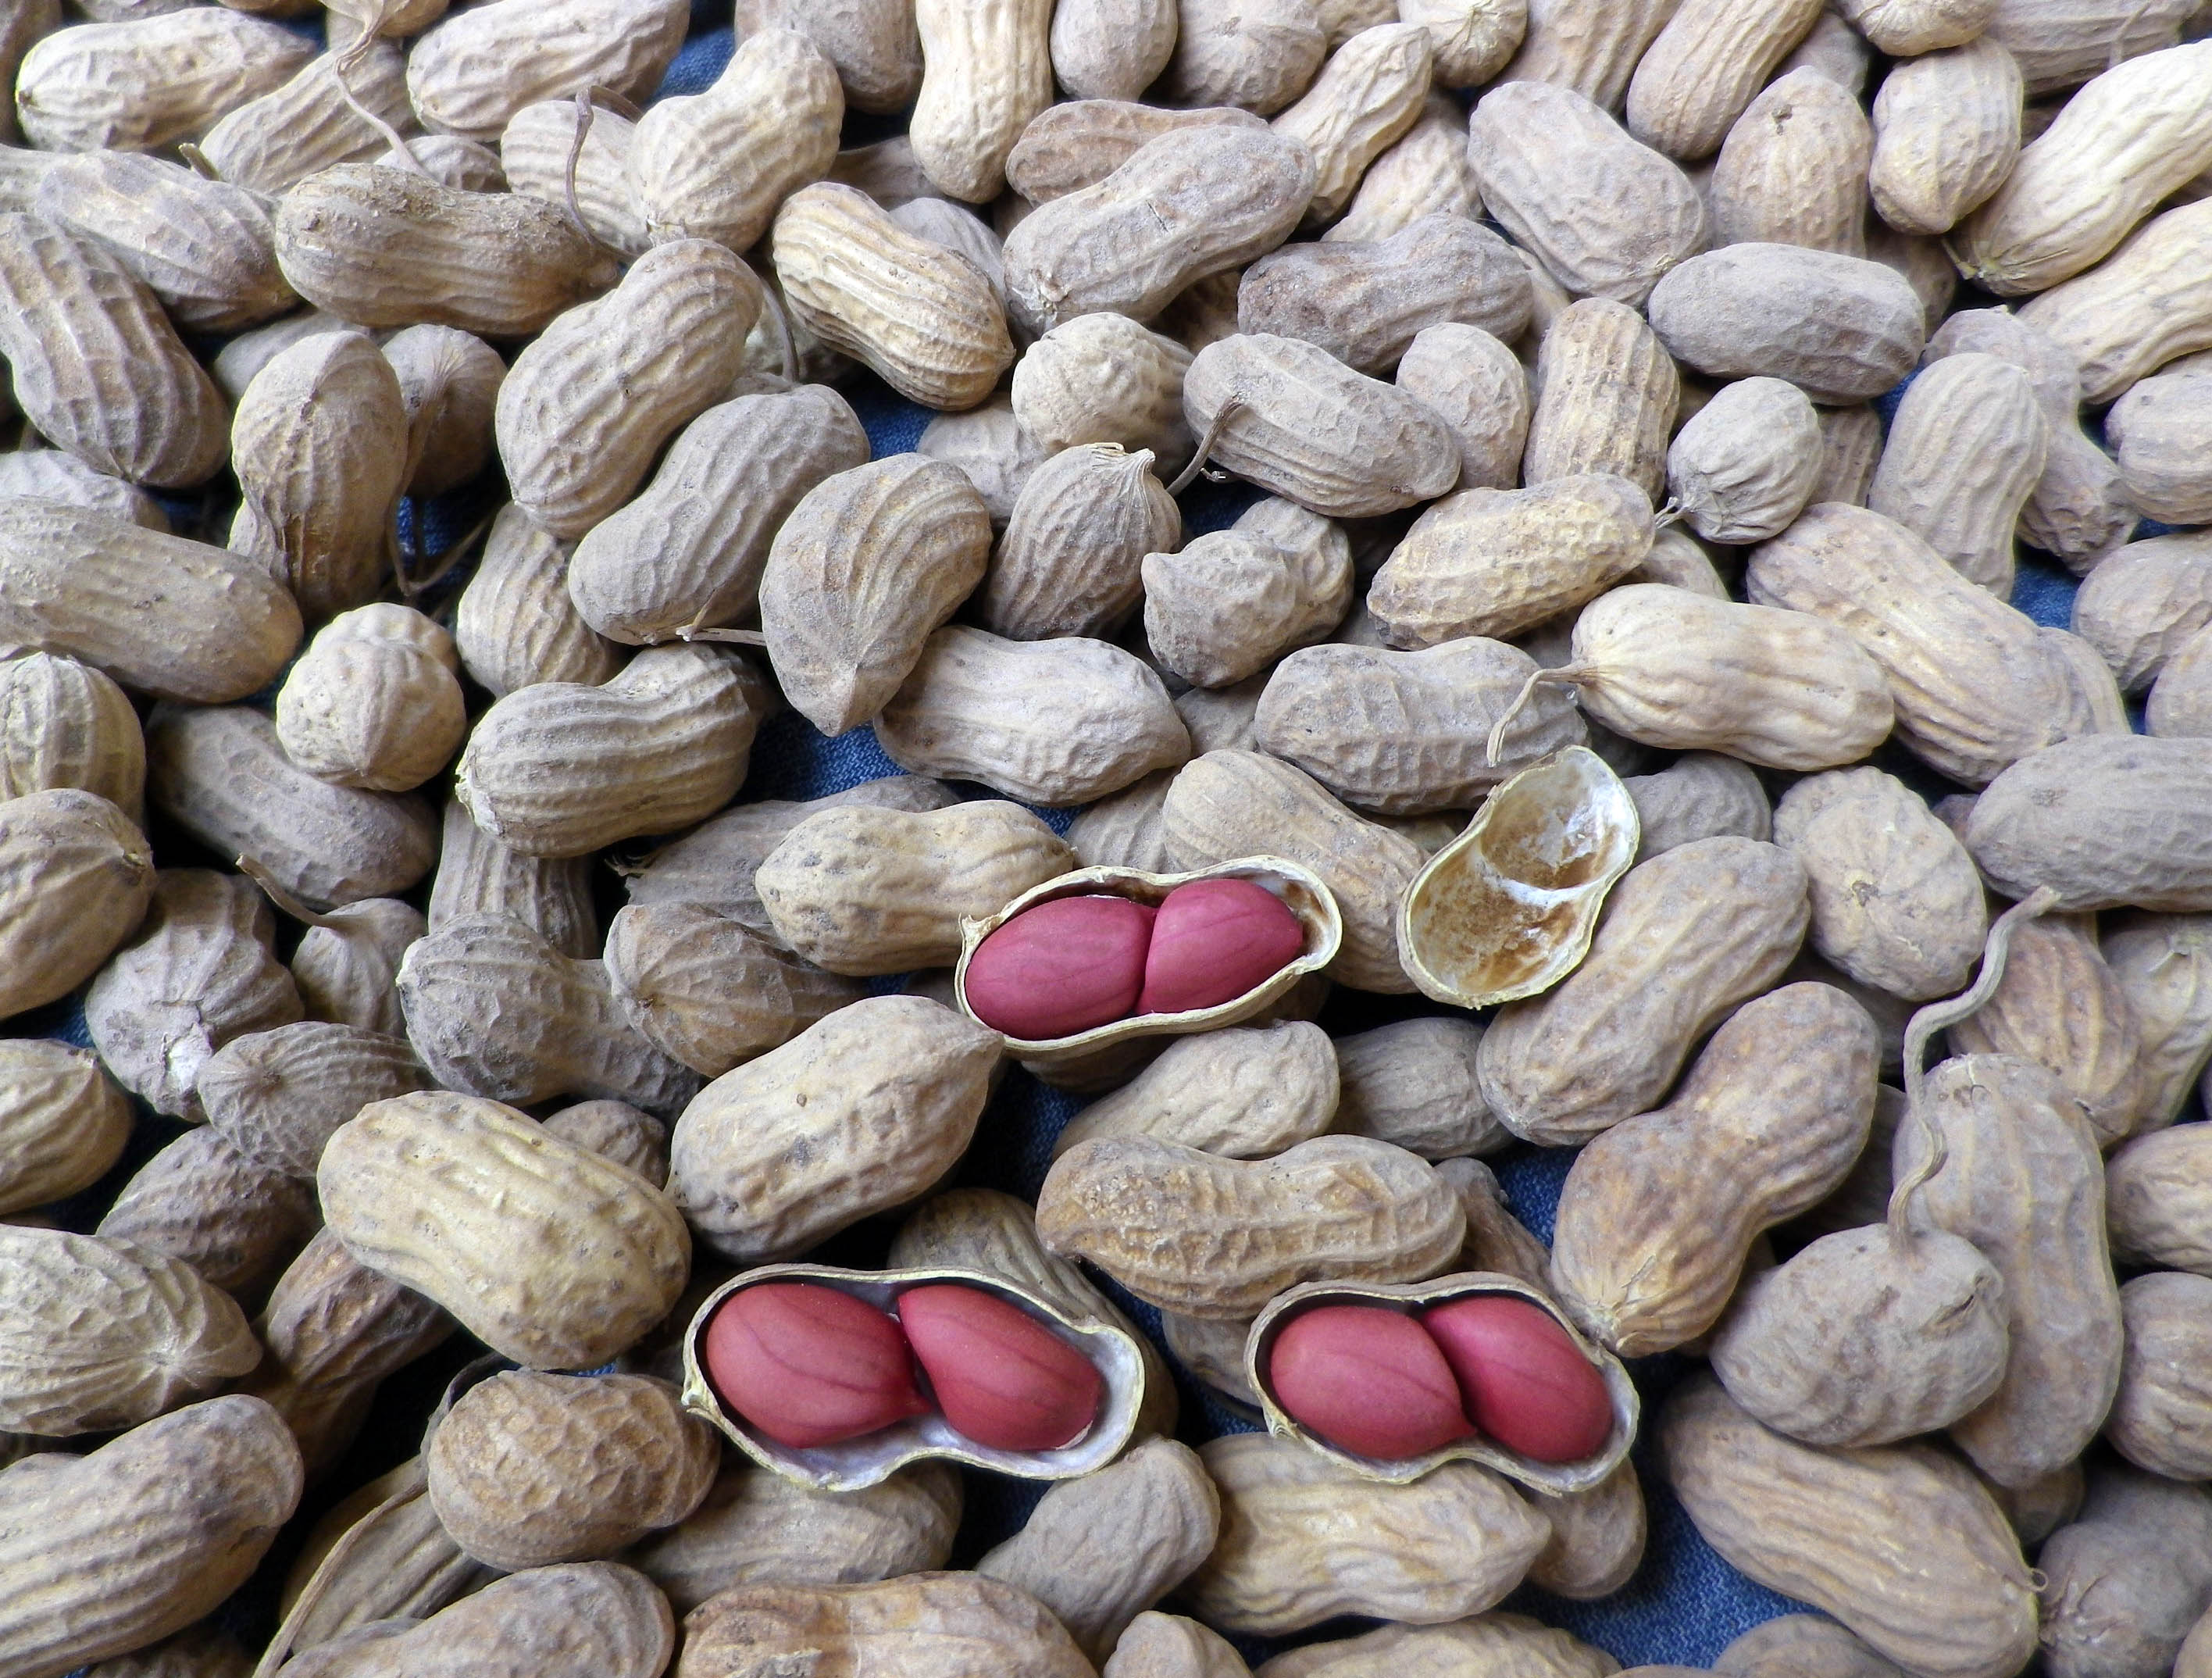 Peanut Allergy Misdiagnosed In 2 Out Of 3 Cases